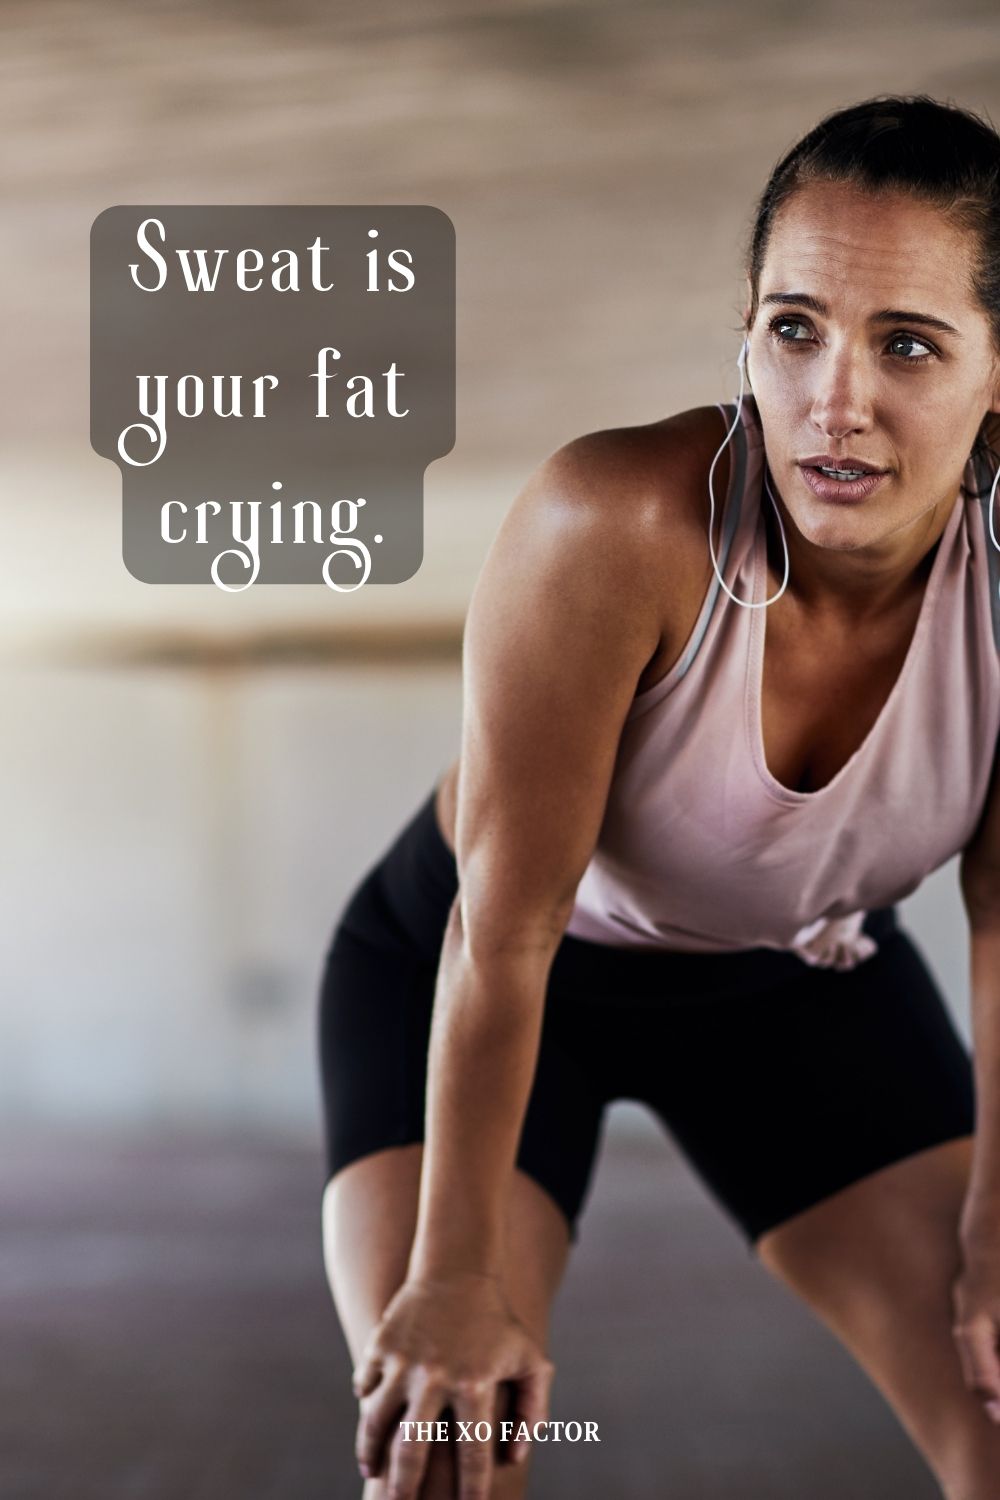 Sweat is your fat crying.